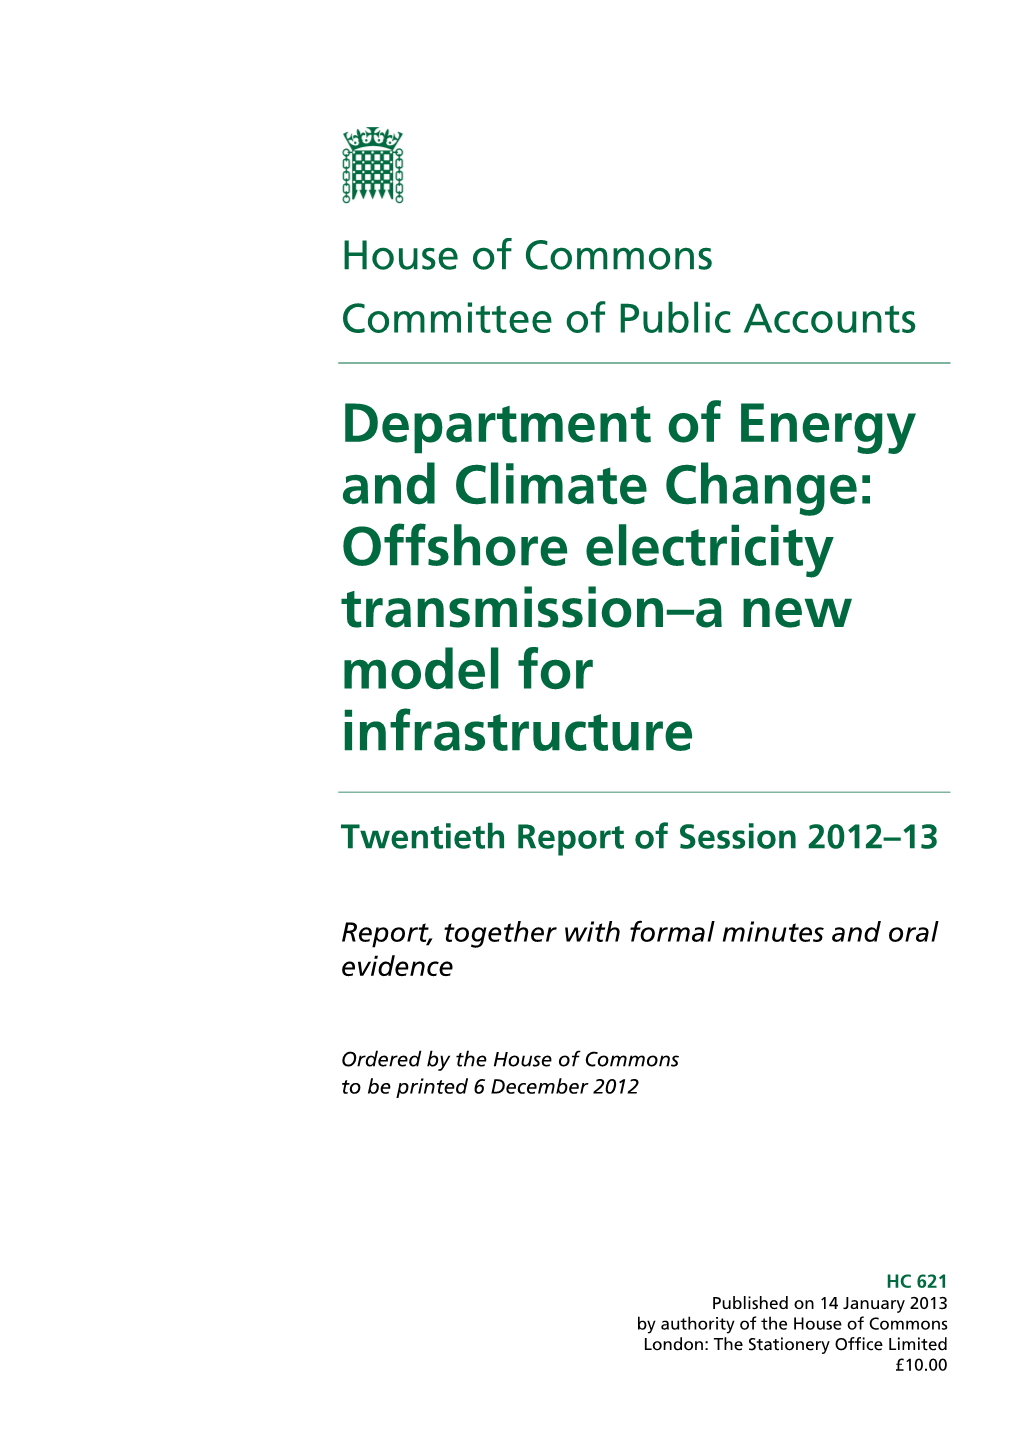 Offshore Electricity Transmission–A New Model for Infrastructure